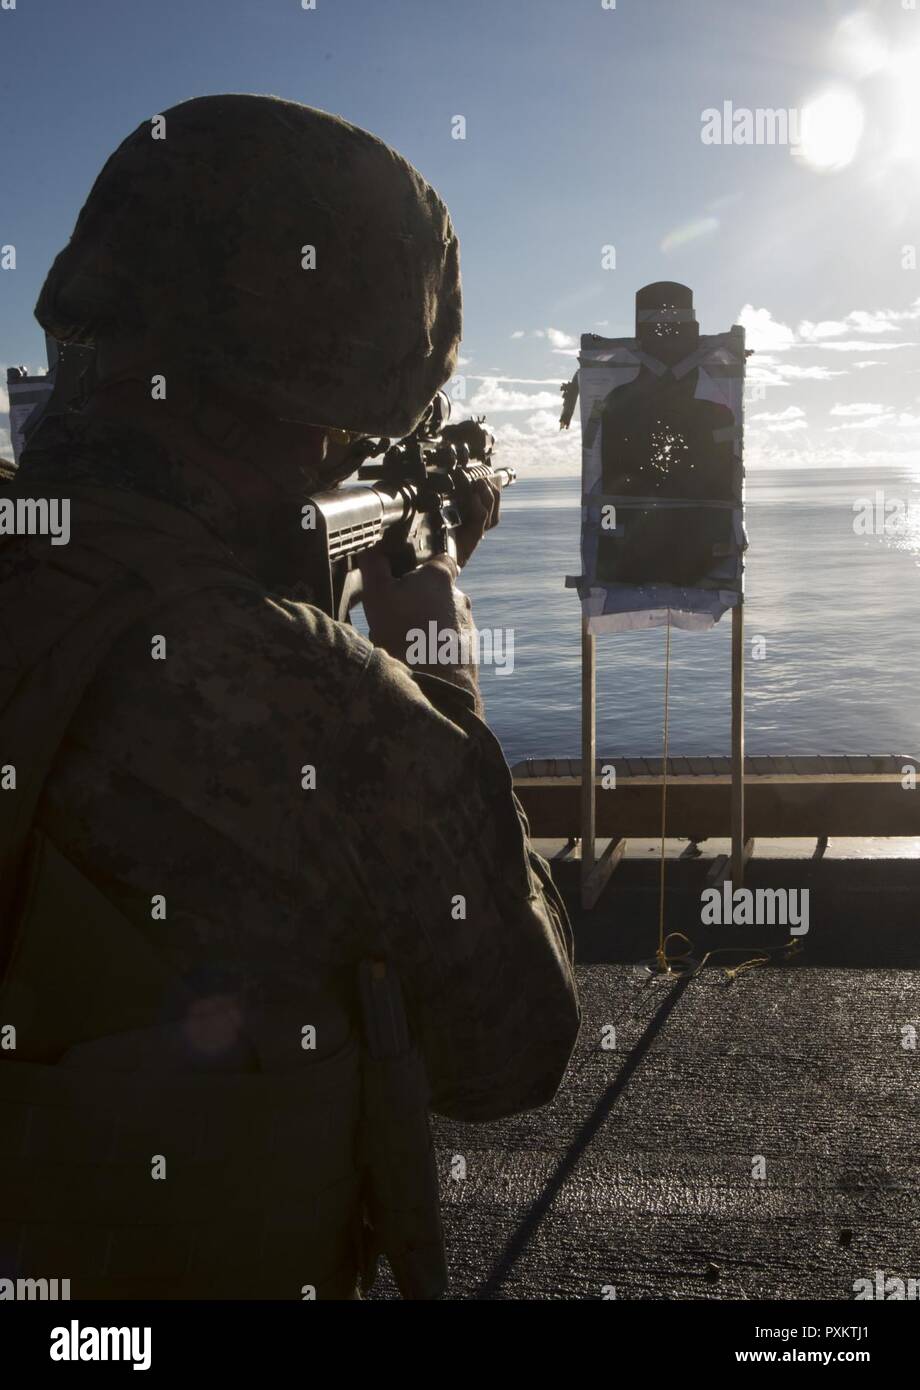 Lance Cpl. Will Bunch, a military policeman with Combat Logistics Battalion 31, fires an M4 carbine during marksmanship training aboard the USS Bonhomme Richard (LHD 6), June 15, 2017. CLB-31 is permanently assigned to the 31st MEU and provides support for all elements of the MEU. The 31st MEU partners with the Navy’s Amphibious Squadron 11 to form the amphibious component of the Bonhomme Richard Expeditionary Strike Group. The 31st MEU and PHIBRON 11 combine to provide a cohesive blue-green team capable of accomplishing a variety of missions across the Indo-Asia-Pacific region. Stock Photo